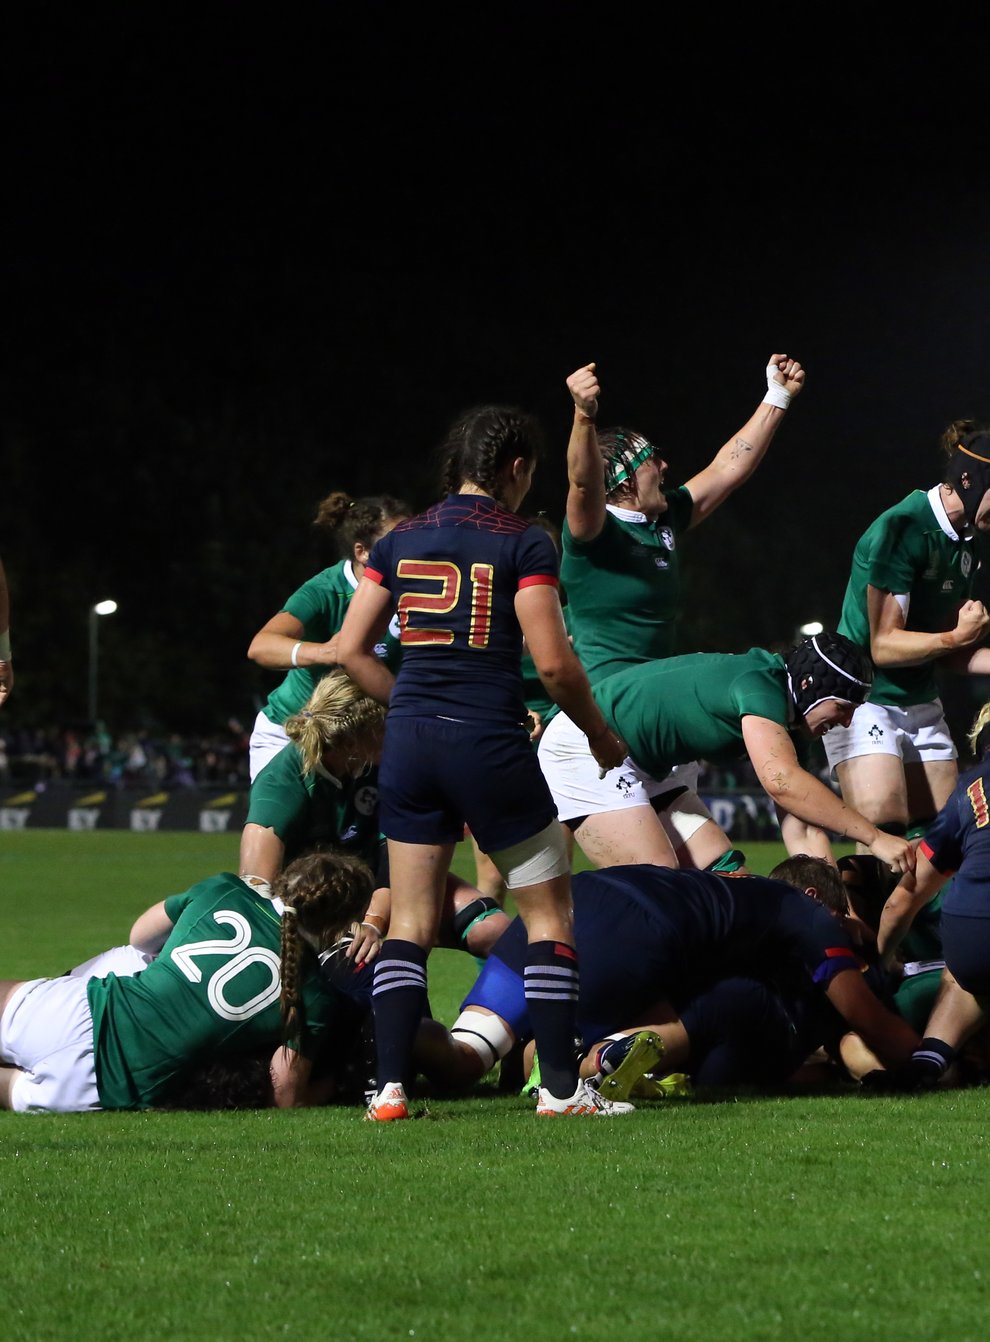 Ireland and France’s fixture will not go ahead this weekend